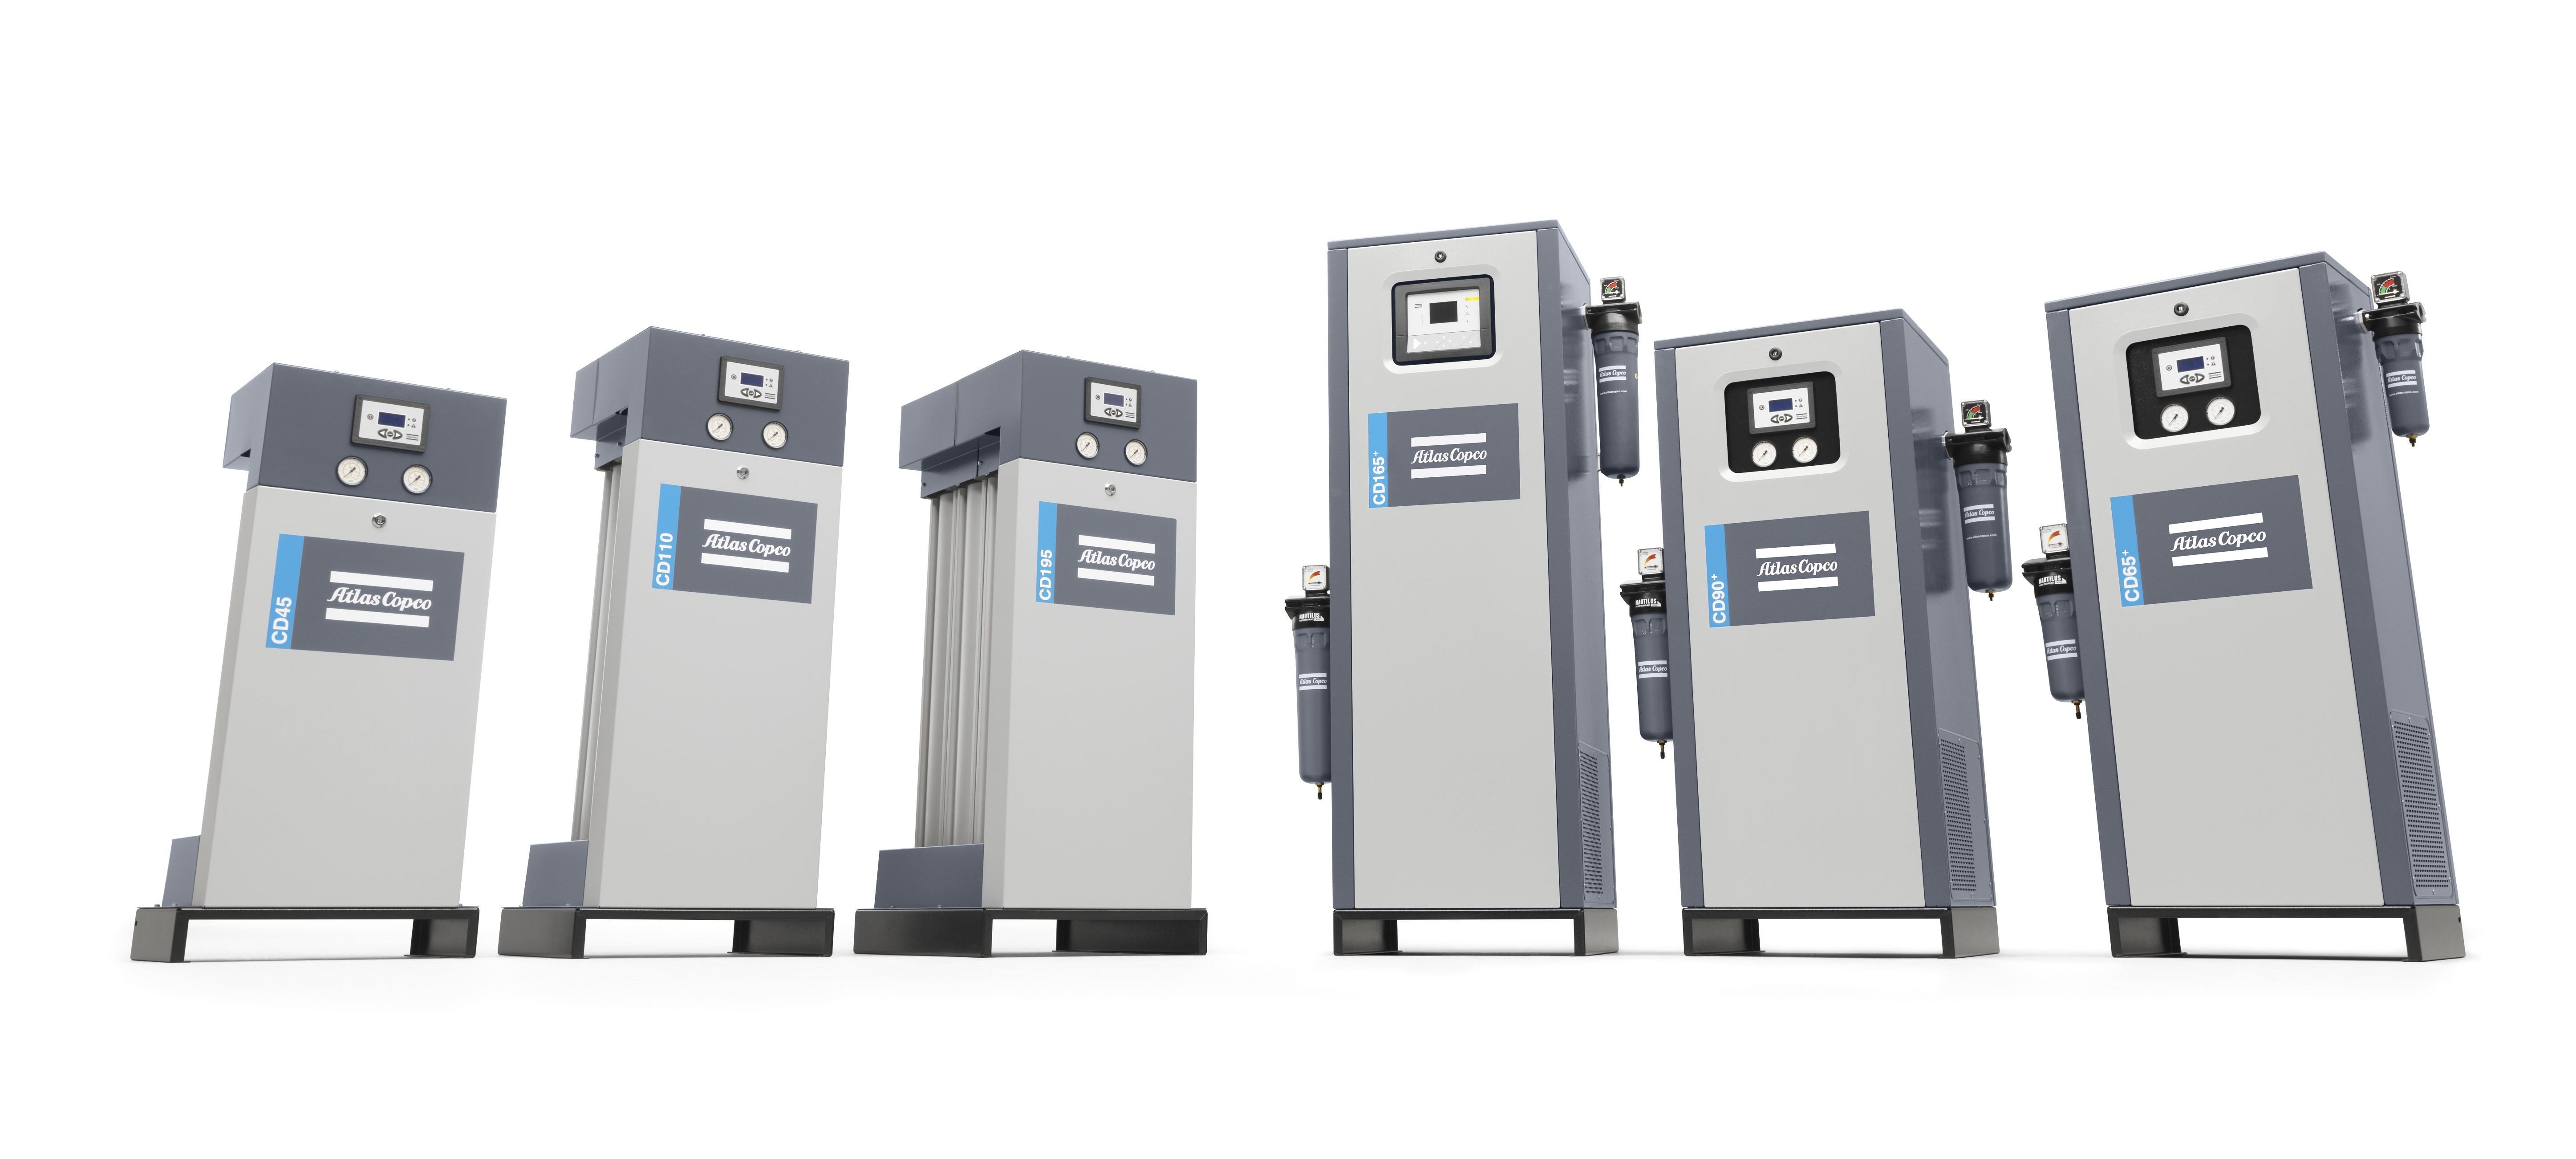 Atlas Copco expands desiccant dryer offer with new energy efficient CD+ and CD ranges